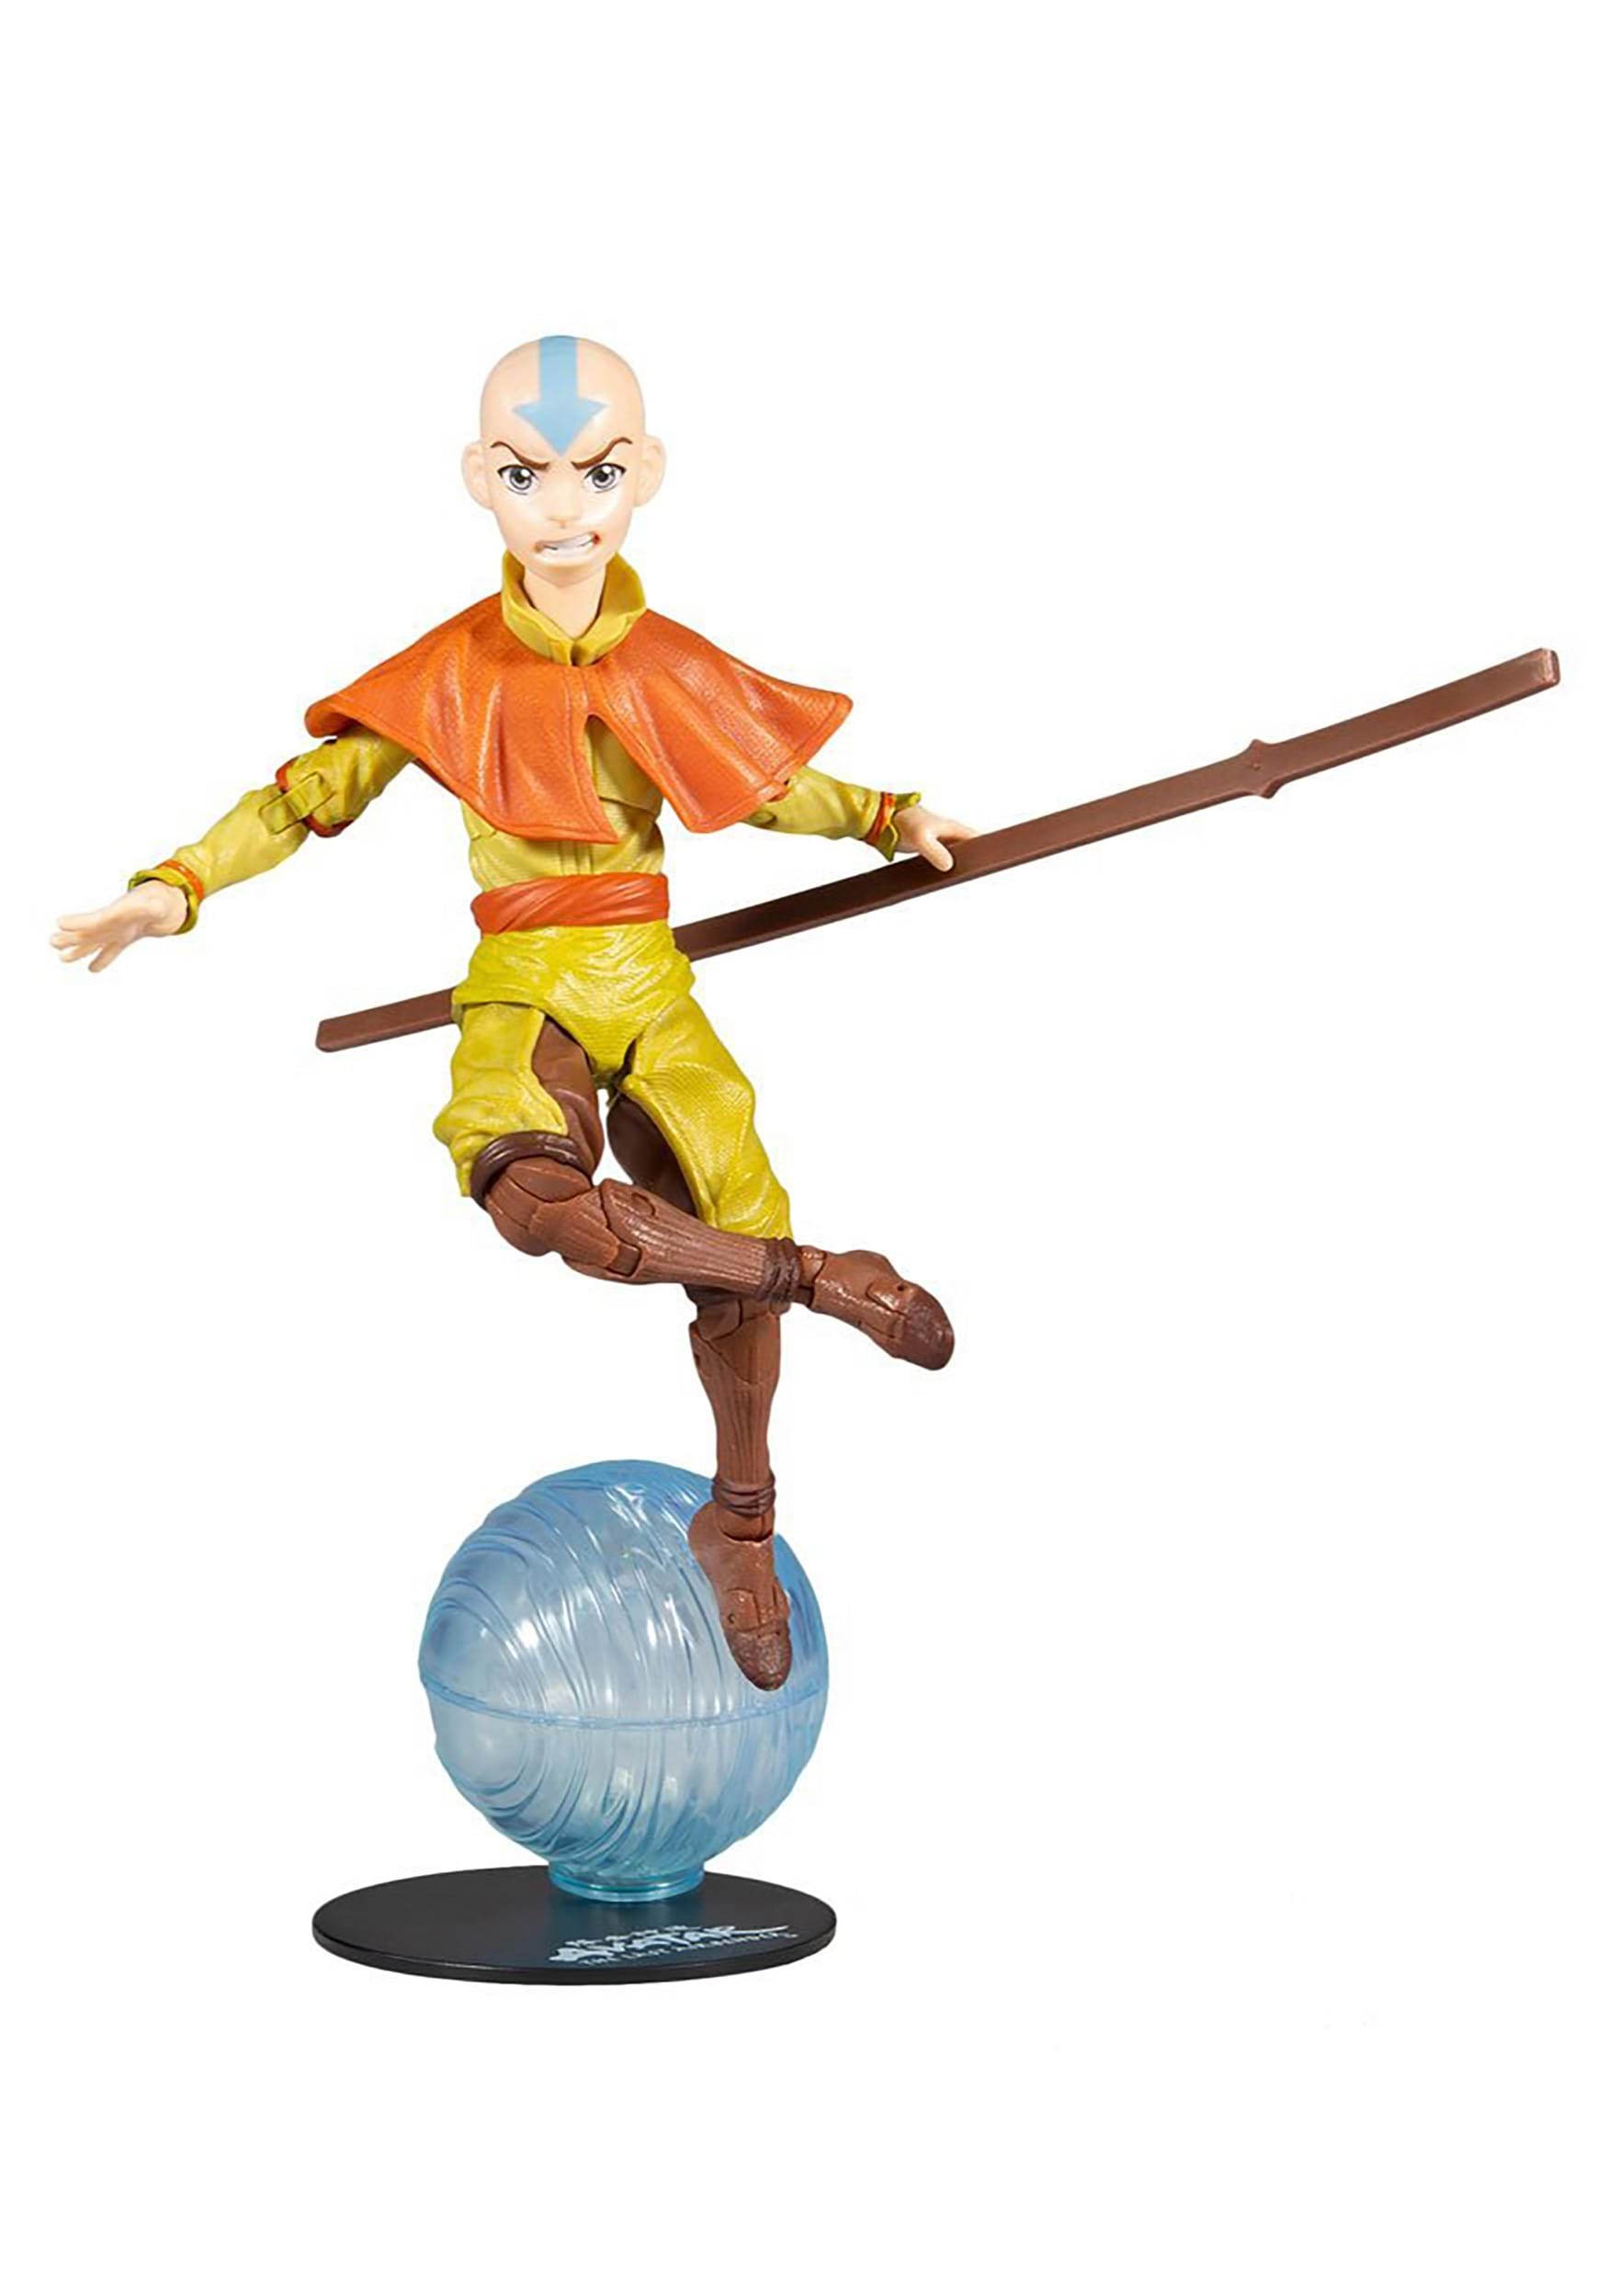 7-Inch Avatar: The Last Airbender Wave 1 Aang Action Figure